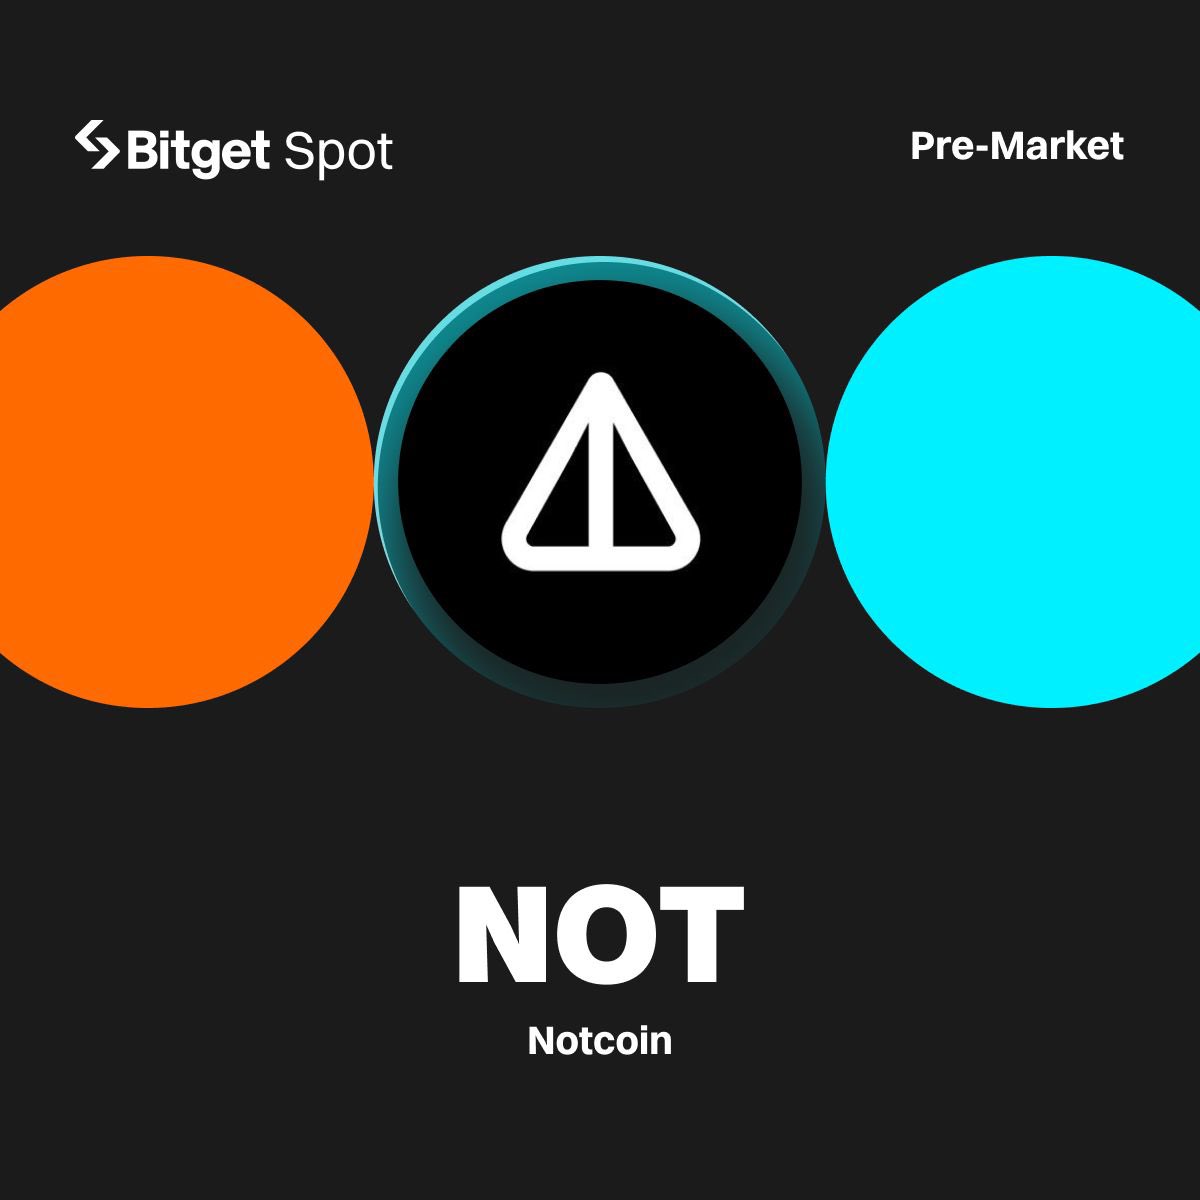 In this pre-market trading, Bitget would list ( Notcoin) NOT. Users can trade NOT in advance, before it becomes available for spot trading. Bitget premarket trade allows direct peer-to-peer transactions between buyers and sellers, especially for coins that are at an early stage.…